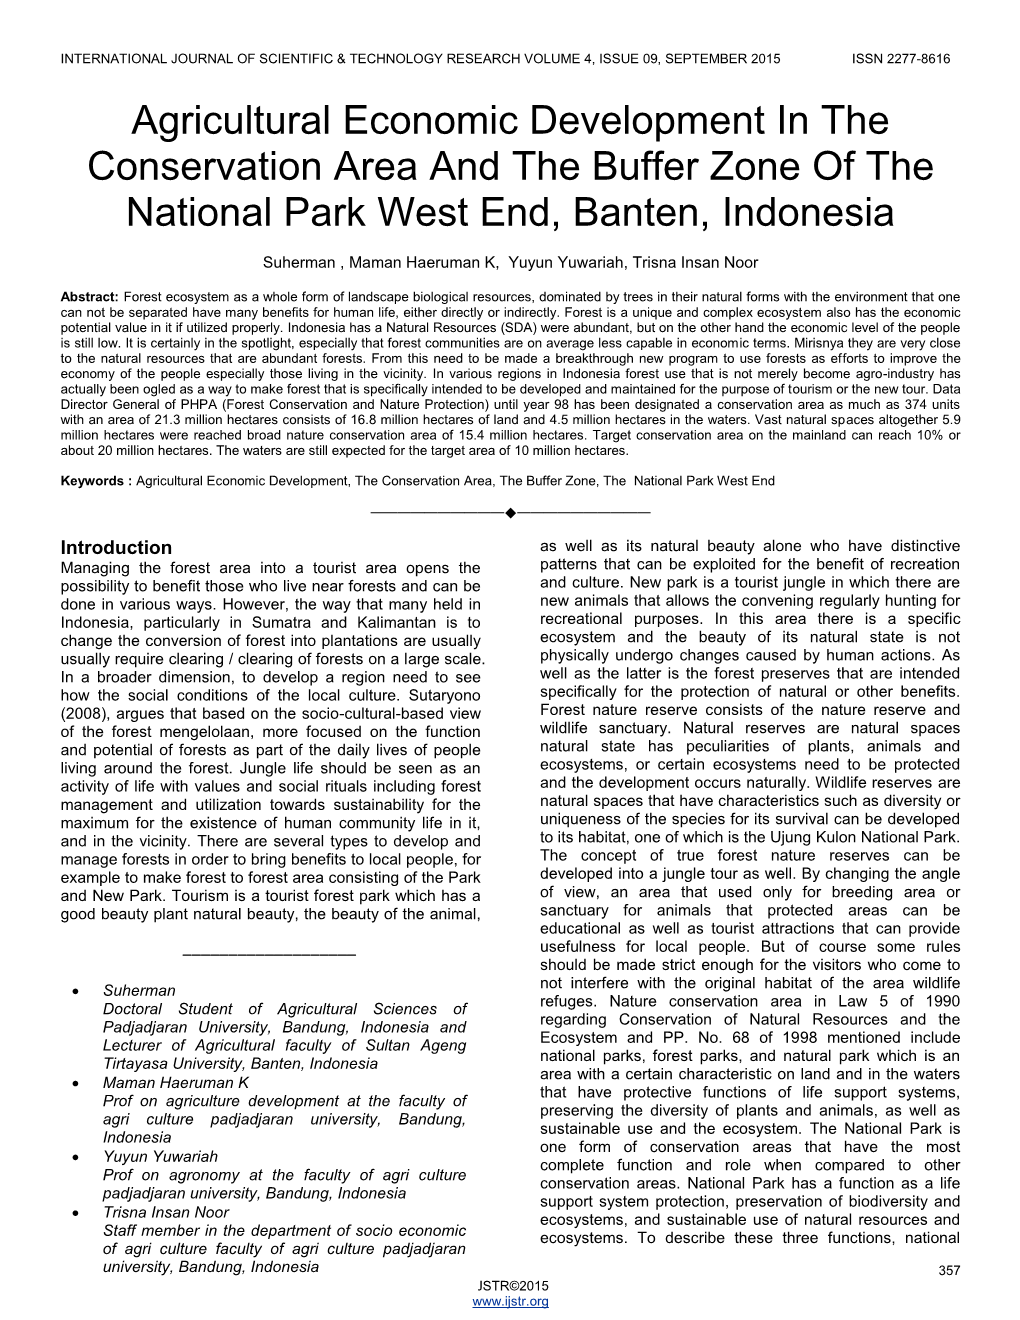 Agricultural Economic Development in the Conservation Area and the Buffer Zone of the National Park West End, Banten, Indonesia